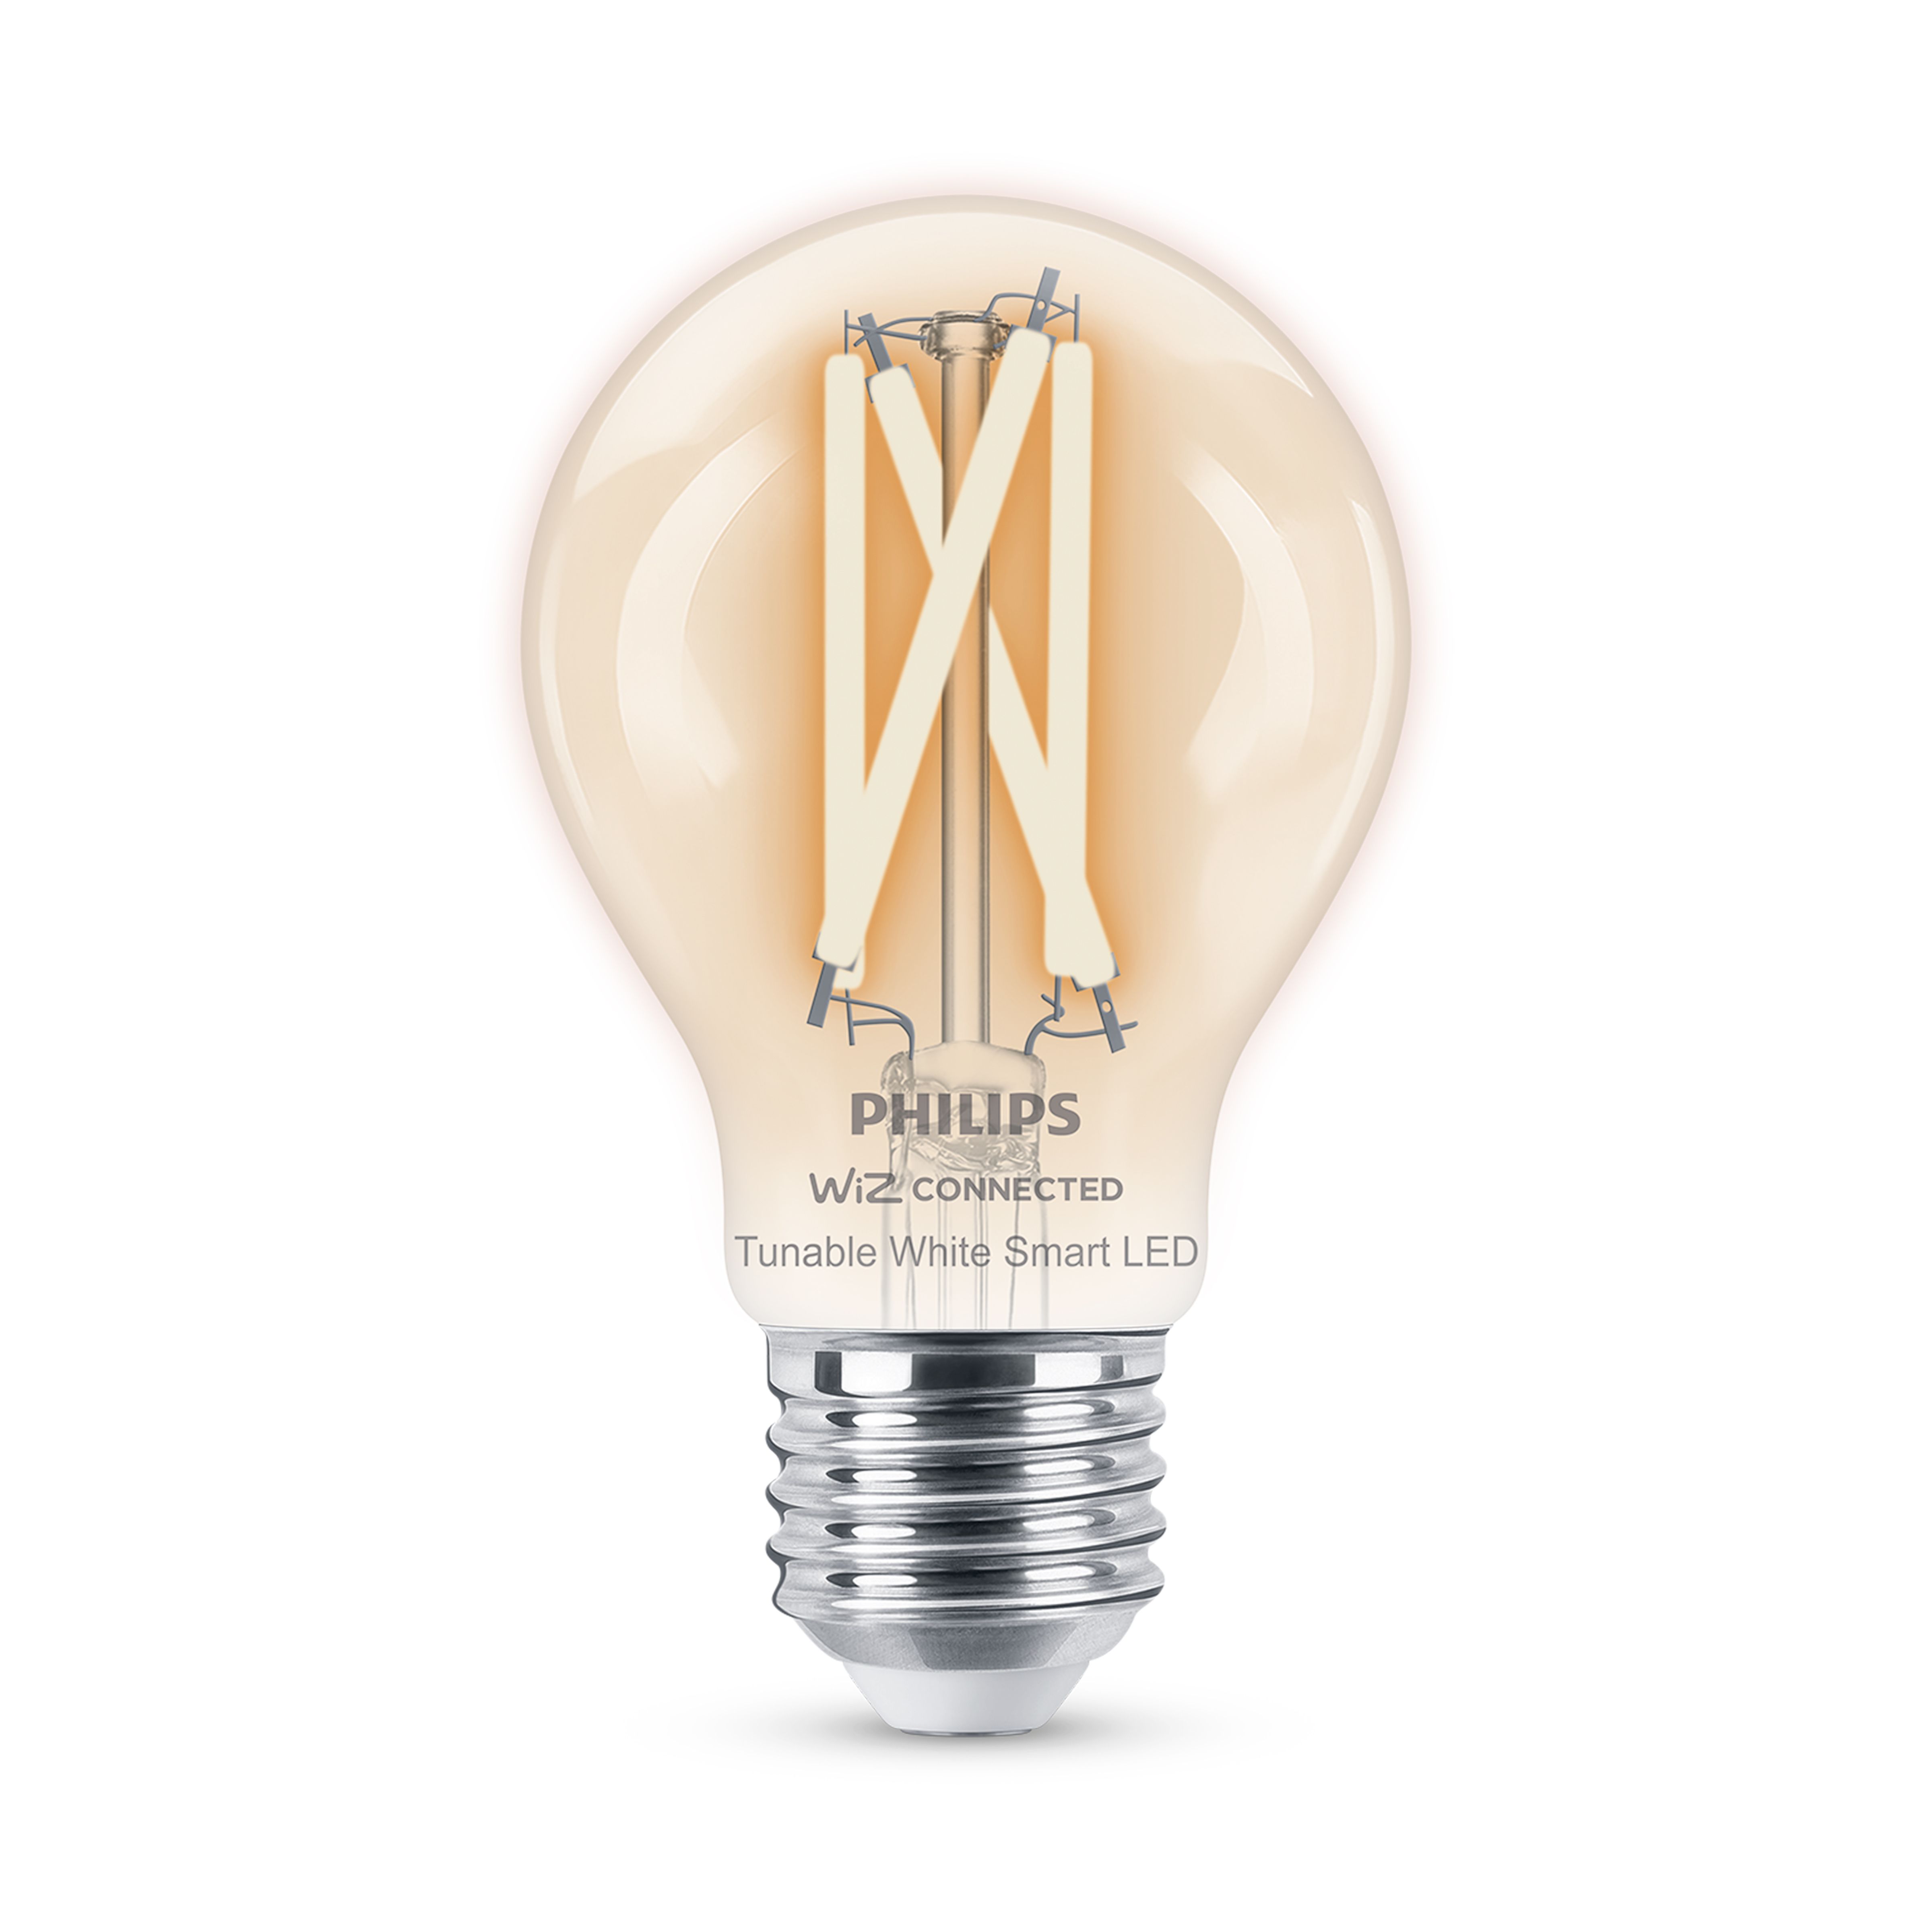 Philips WiZ E27 60W LED Cool white & warm white A60 Dimmable Filament Smart Light bulb